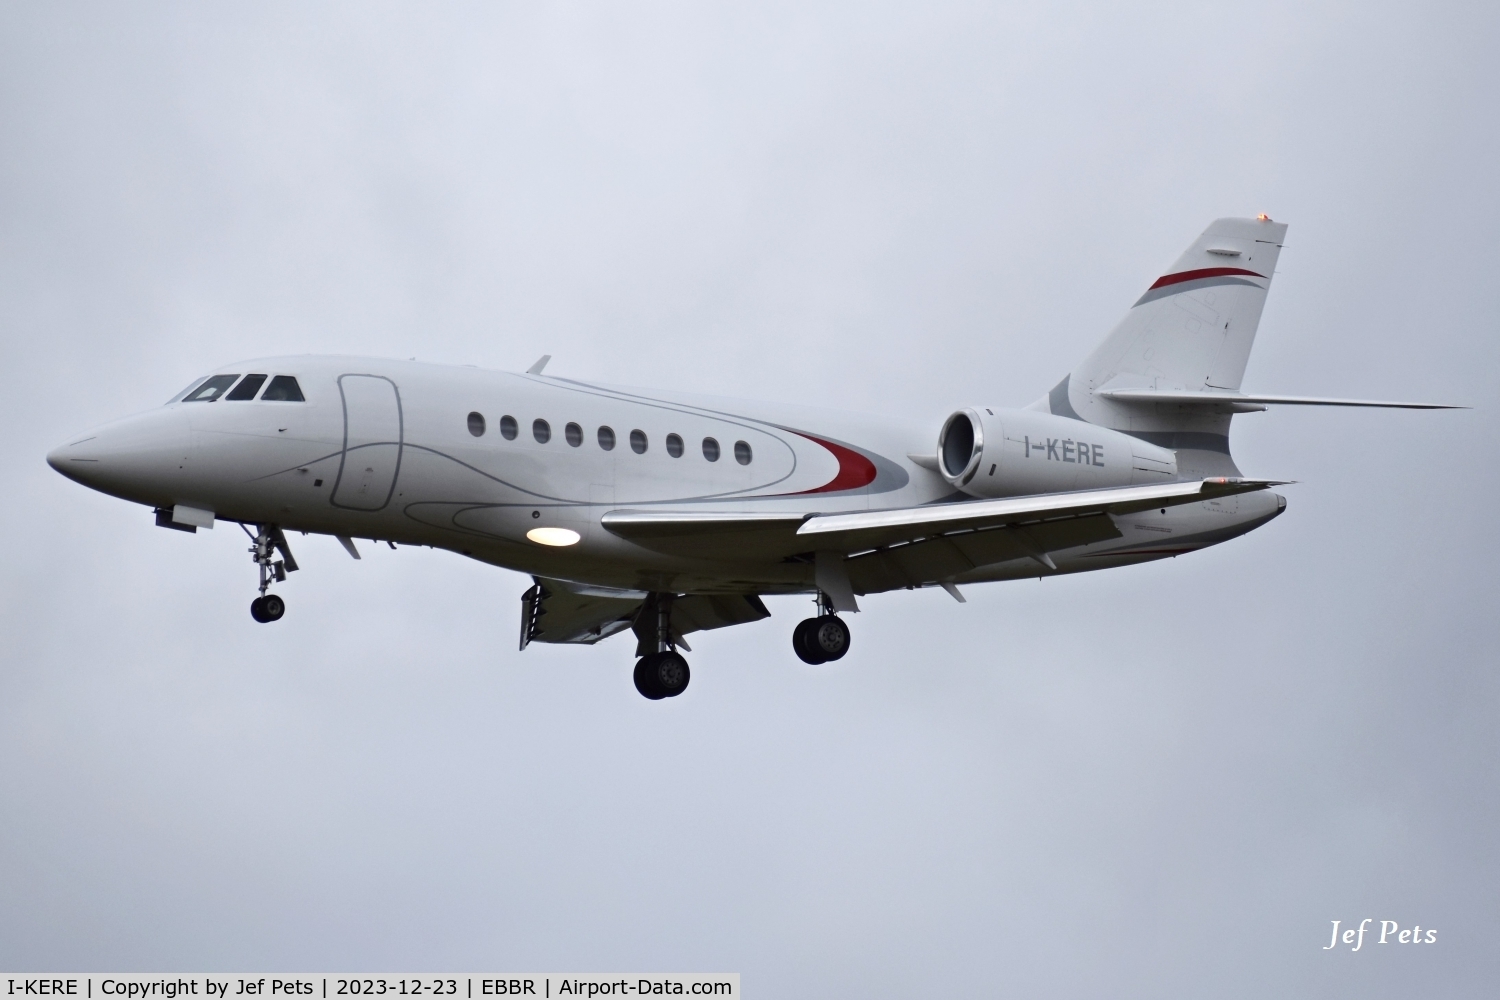 I-KERE, 2002 Dassault Falcon 2000 C/N 197, Landing at Brussels Airport.